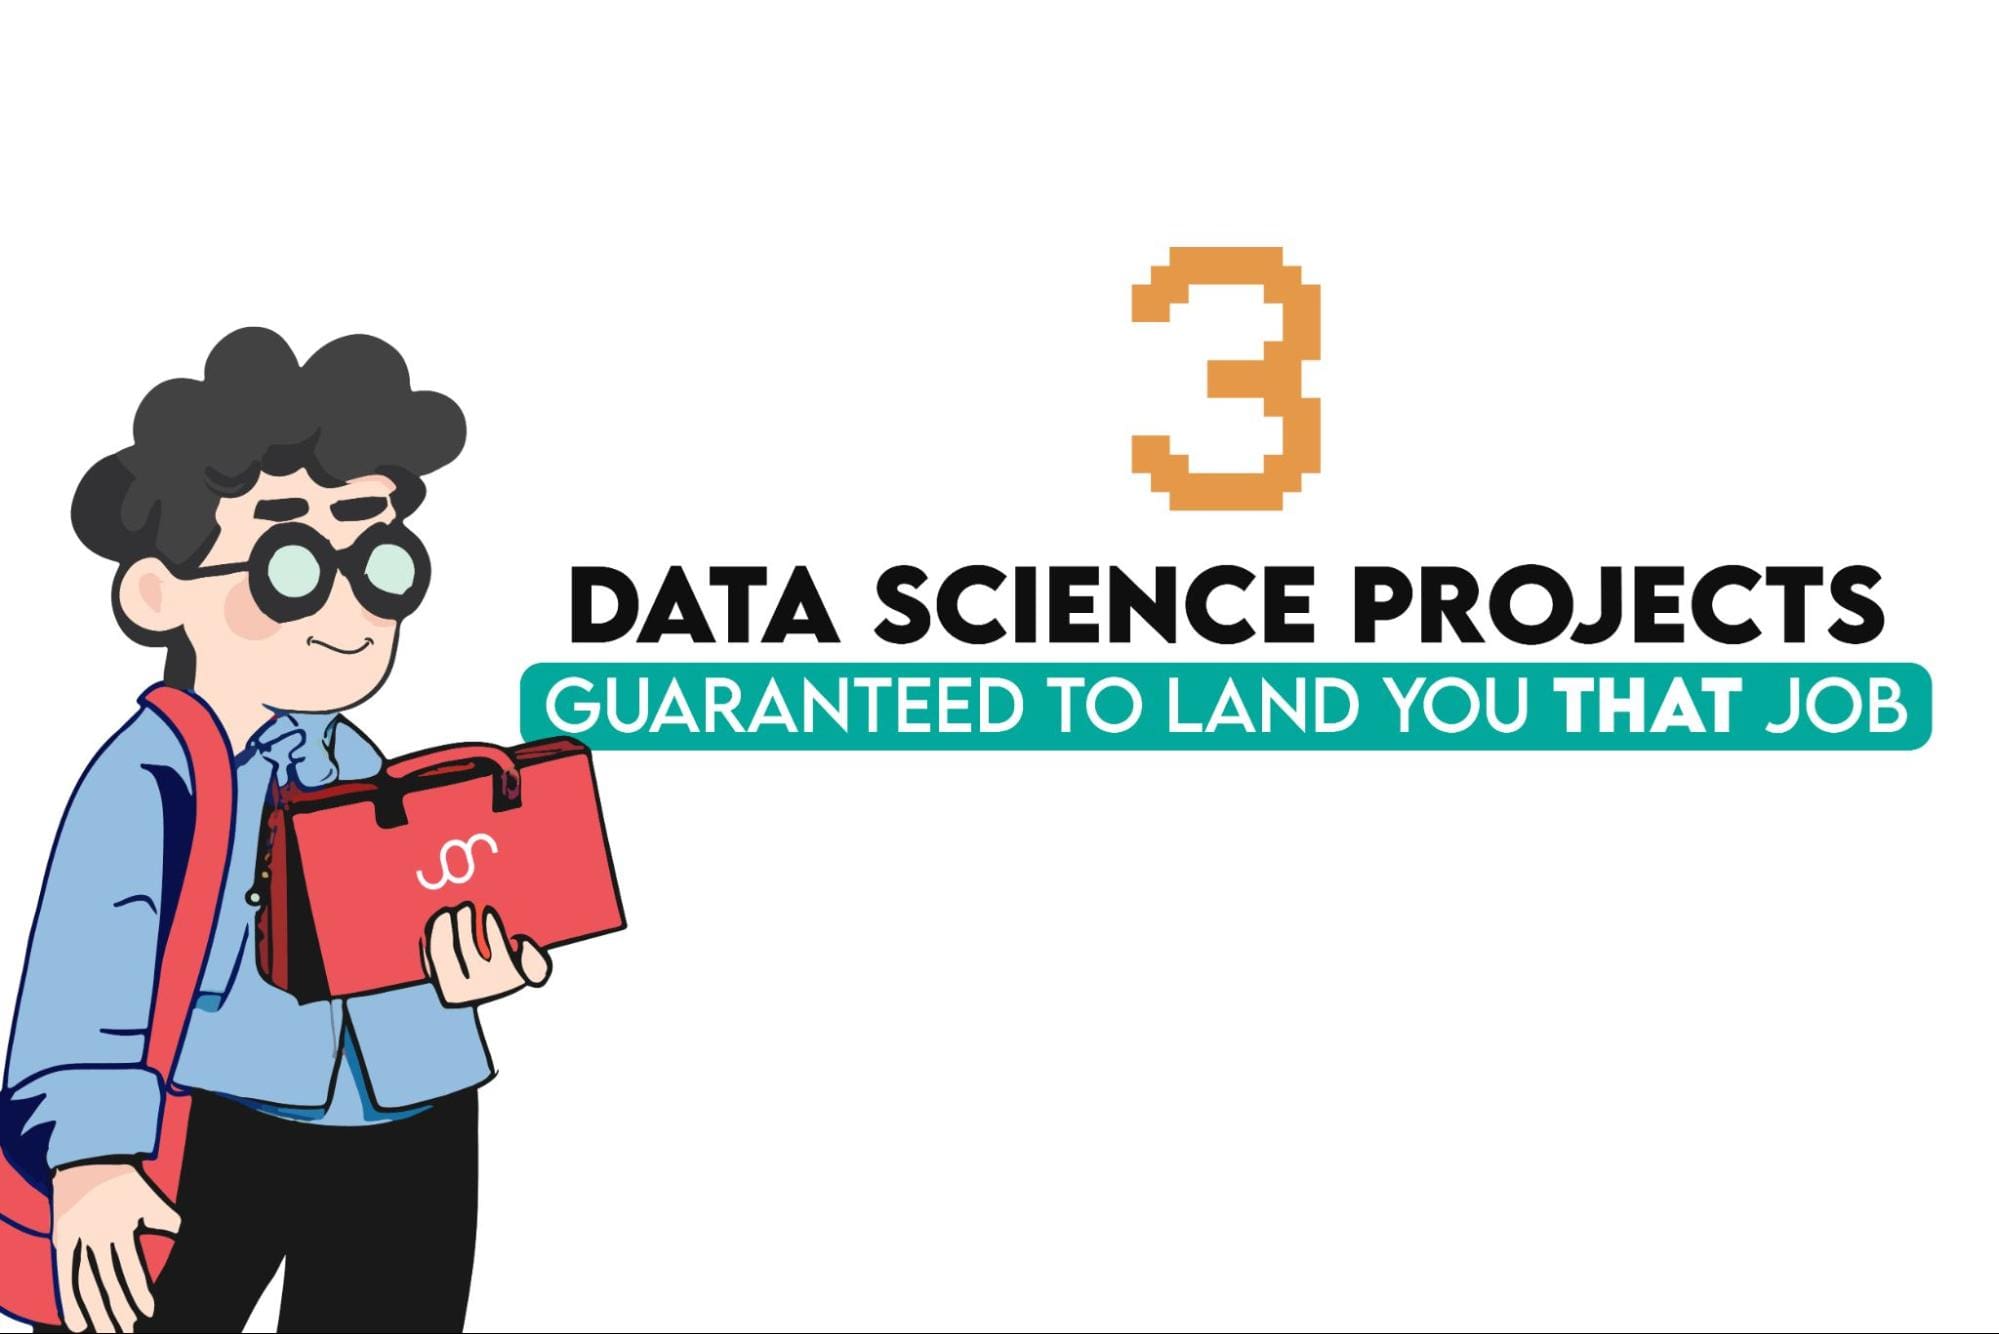 3 Data Science Projects Guaranteed to Land You That Job